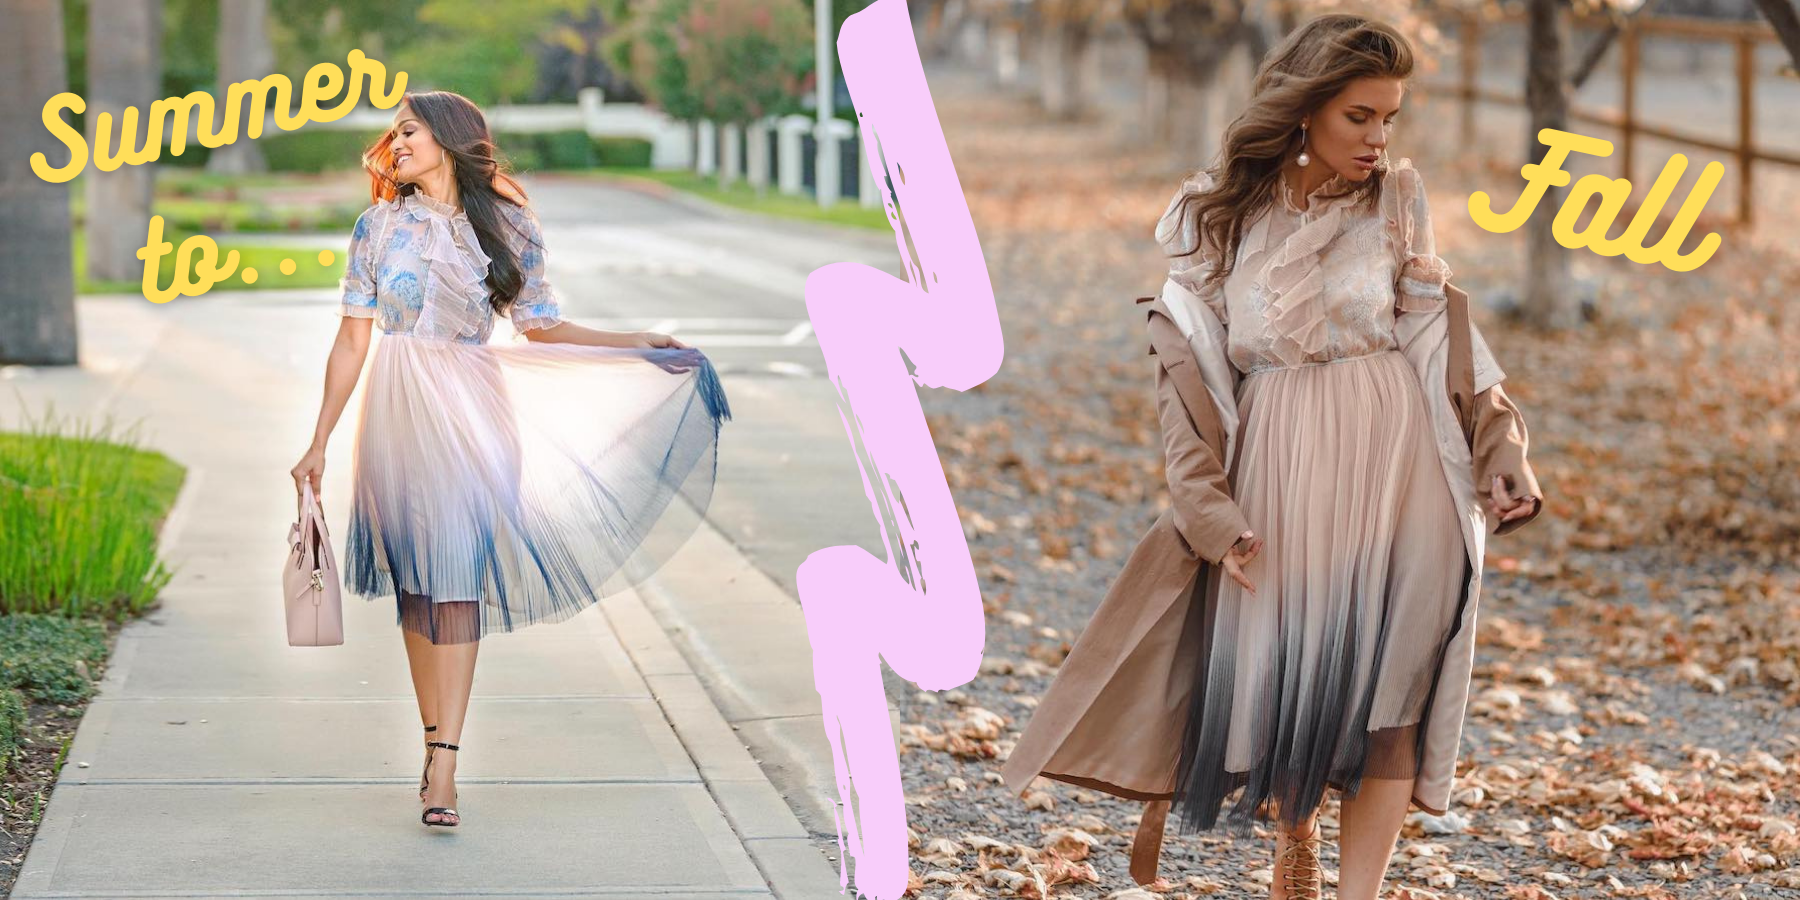 photo on left shows a woma nwearing a tulle dress with a nude to navy gradient and right shows woman wearing the same dress with boots and a coat over it